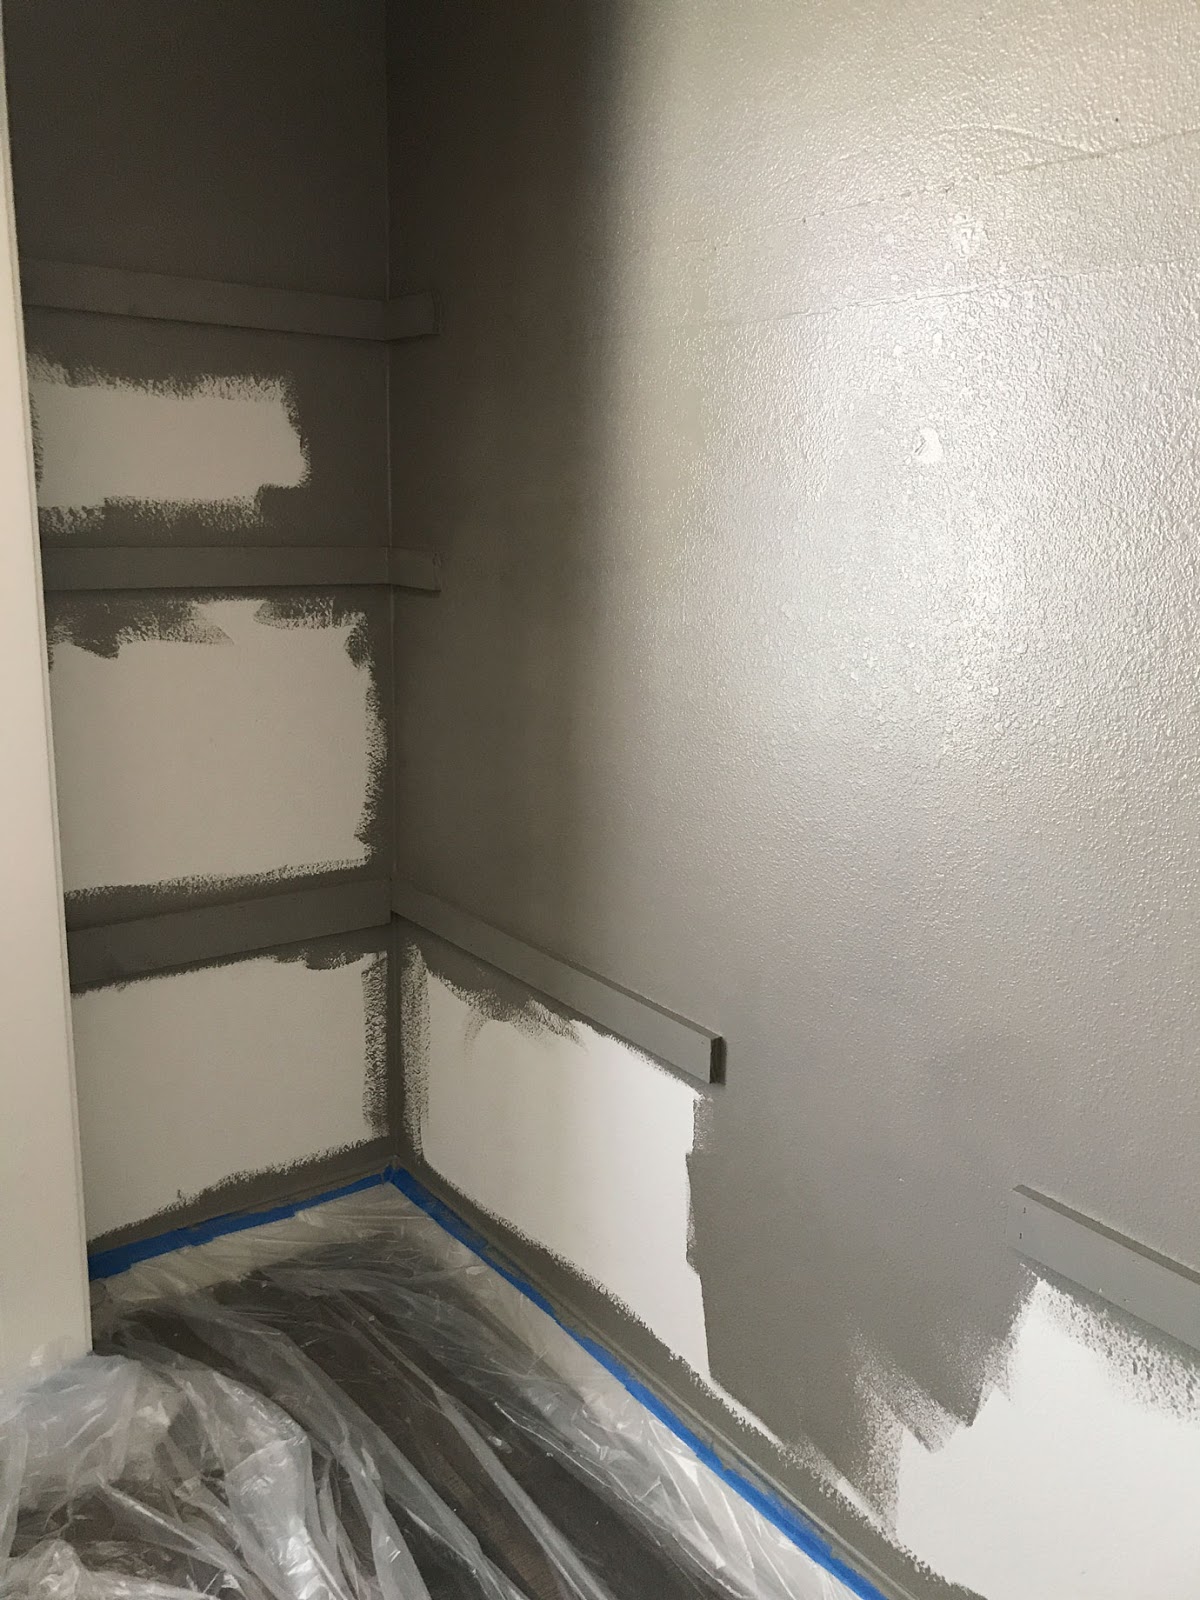 Painting the inside of the office closet desk space and the shelf supports